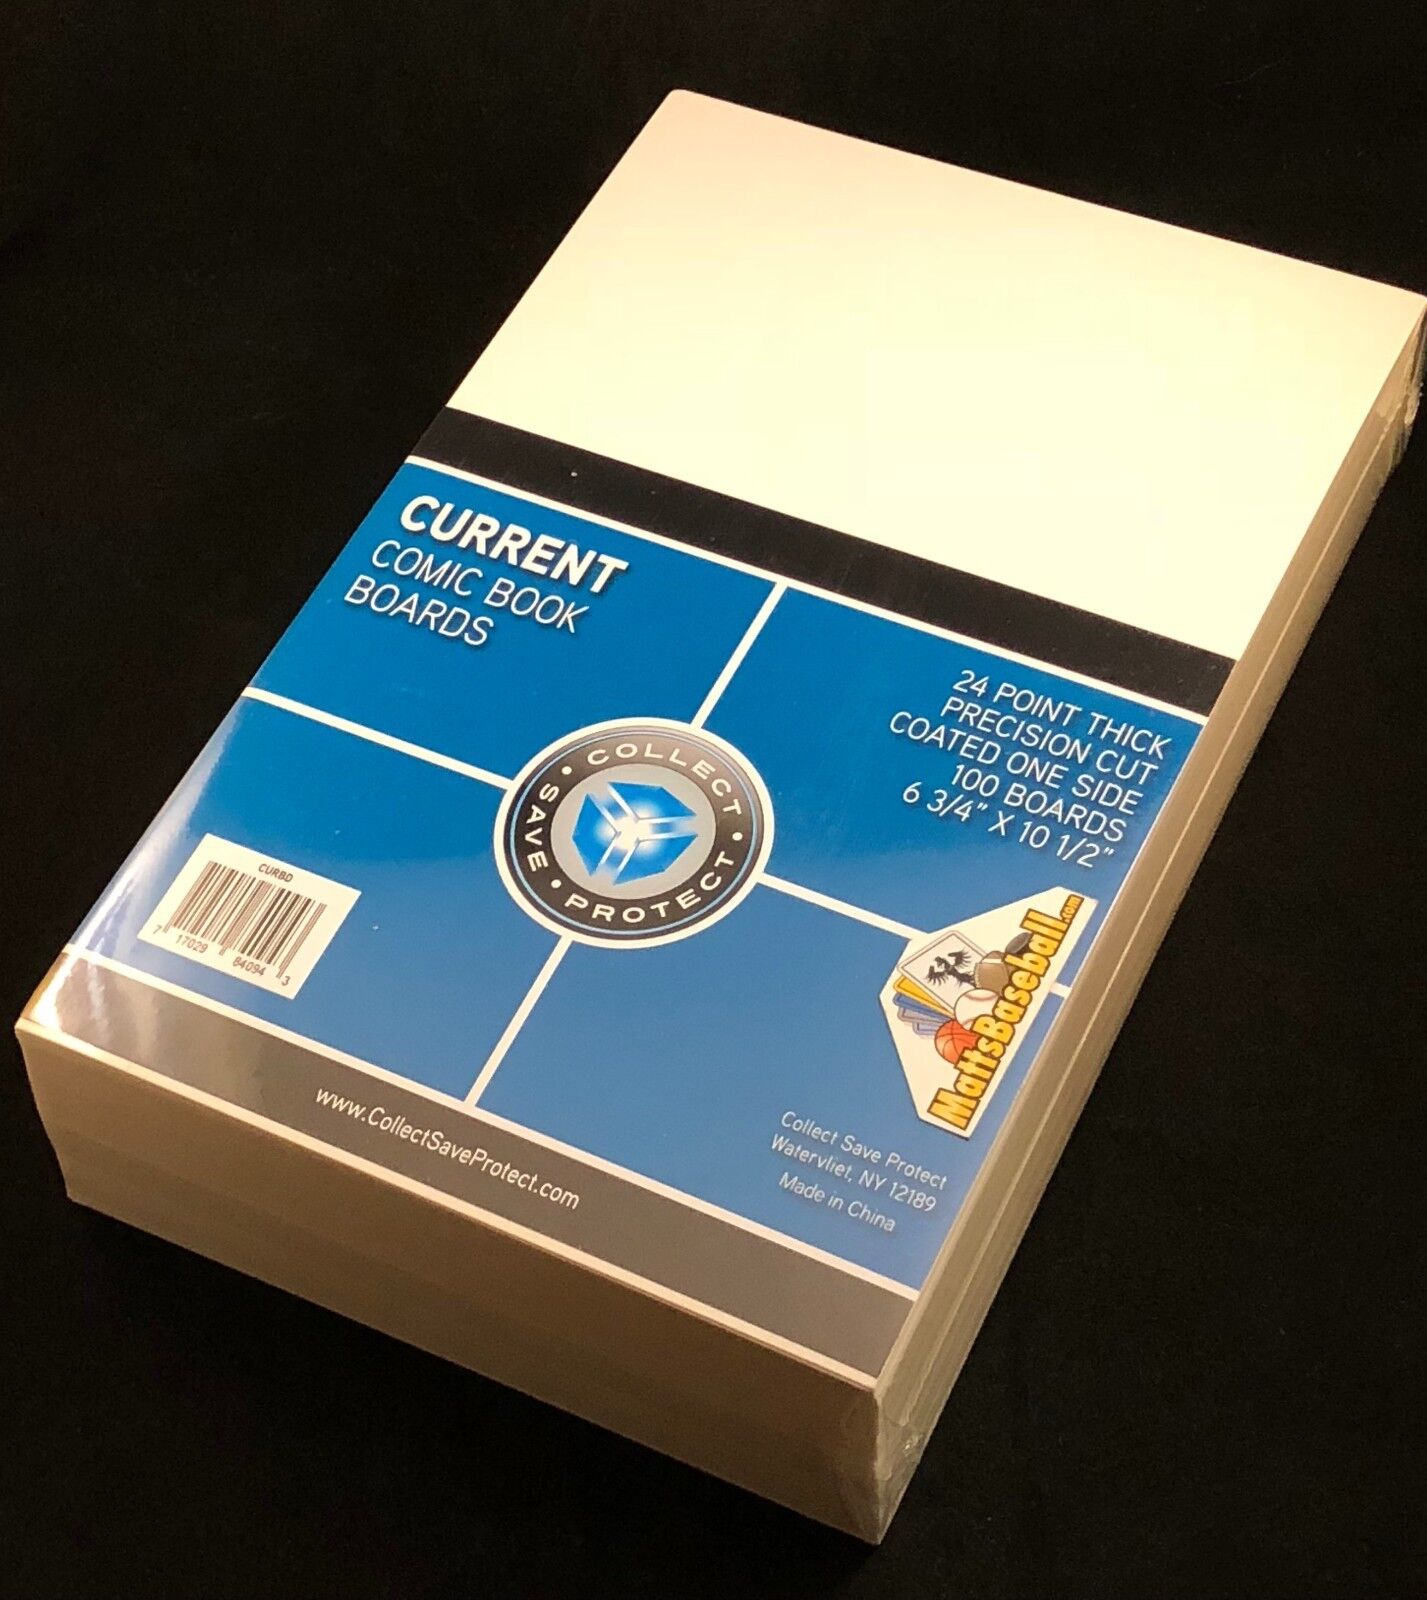 600 NEW CSP Current Comic RESEAL Bags and Boards Modern Archival Book Storage